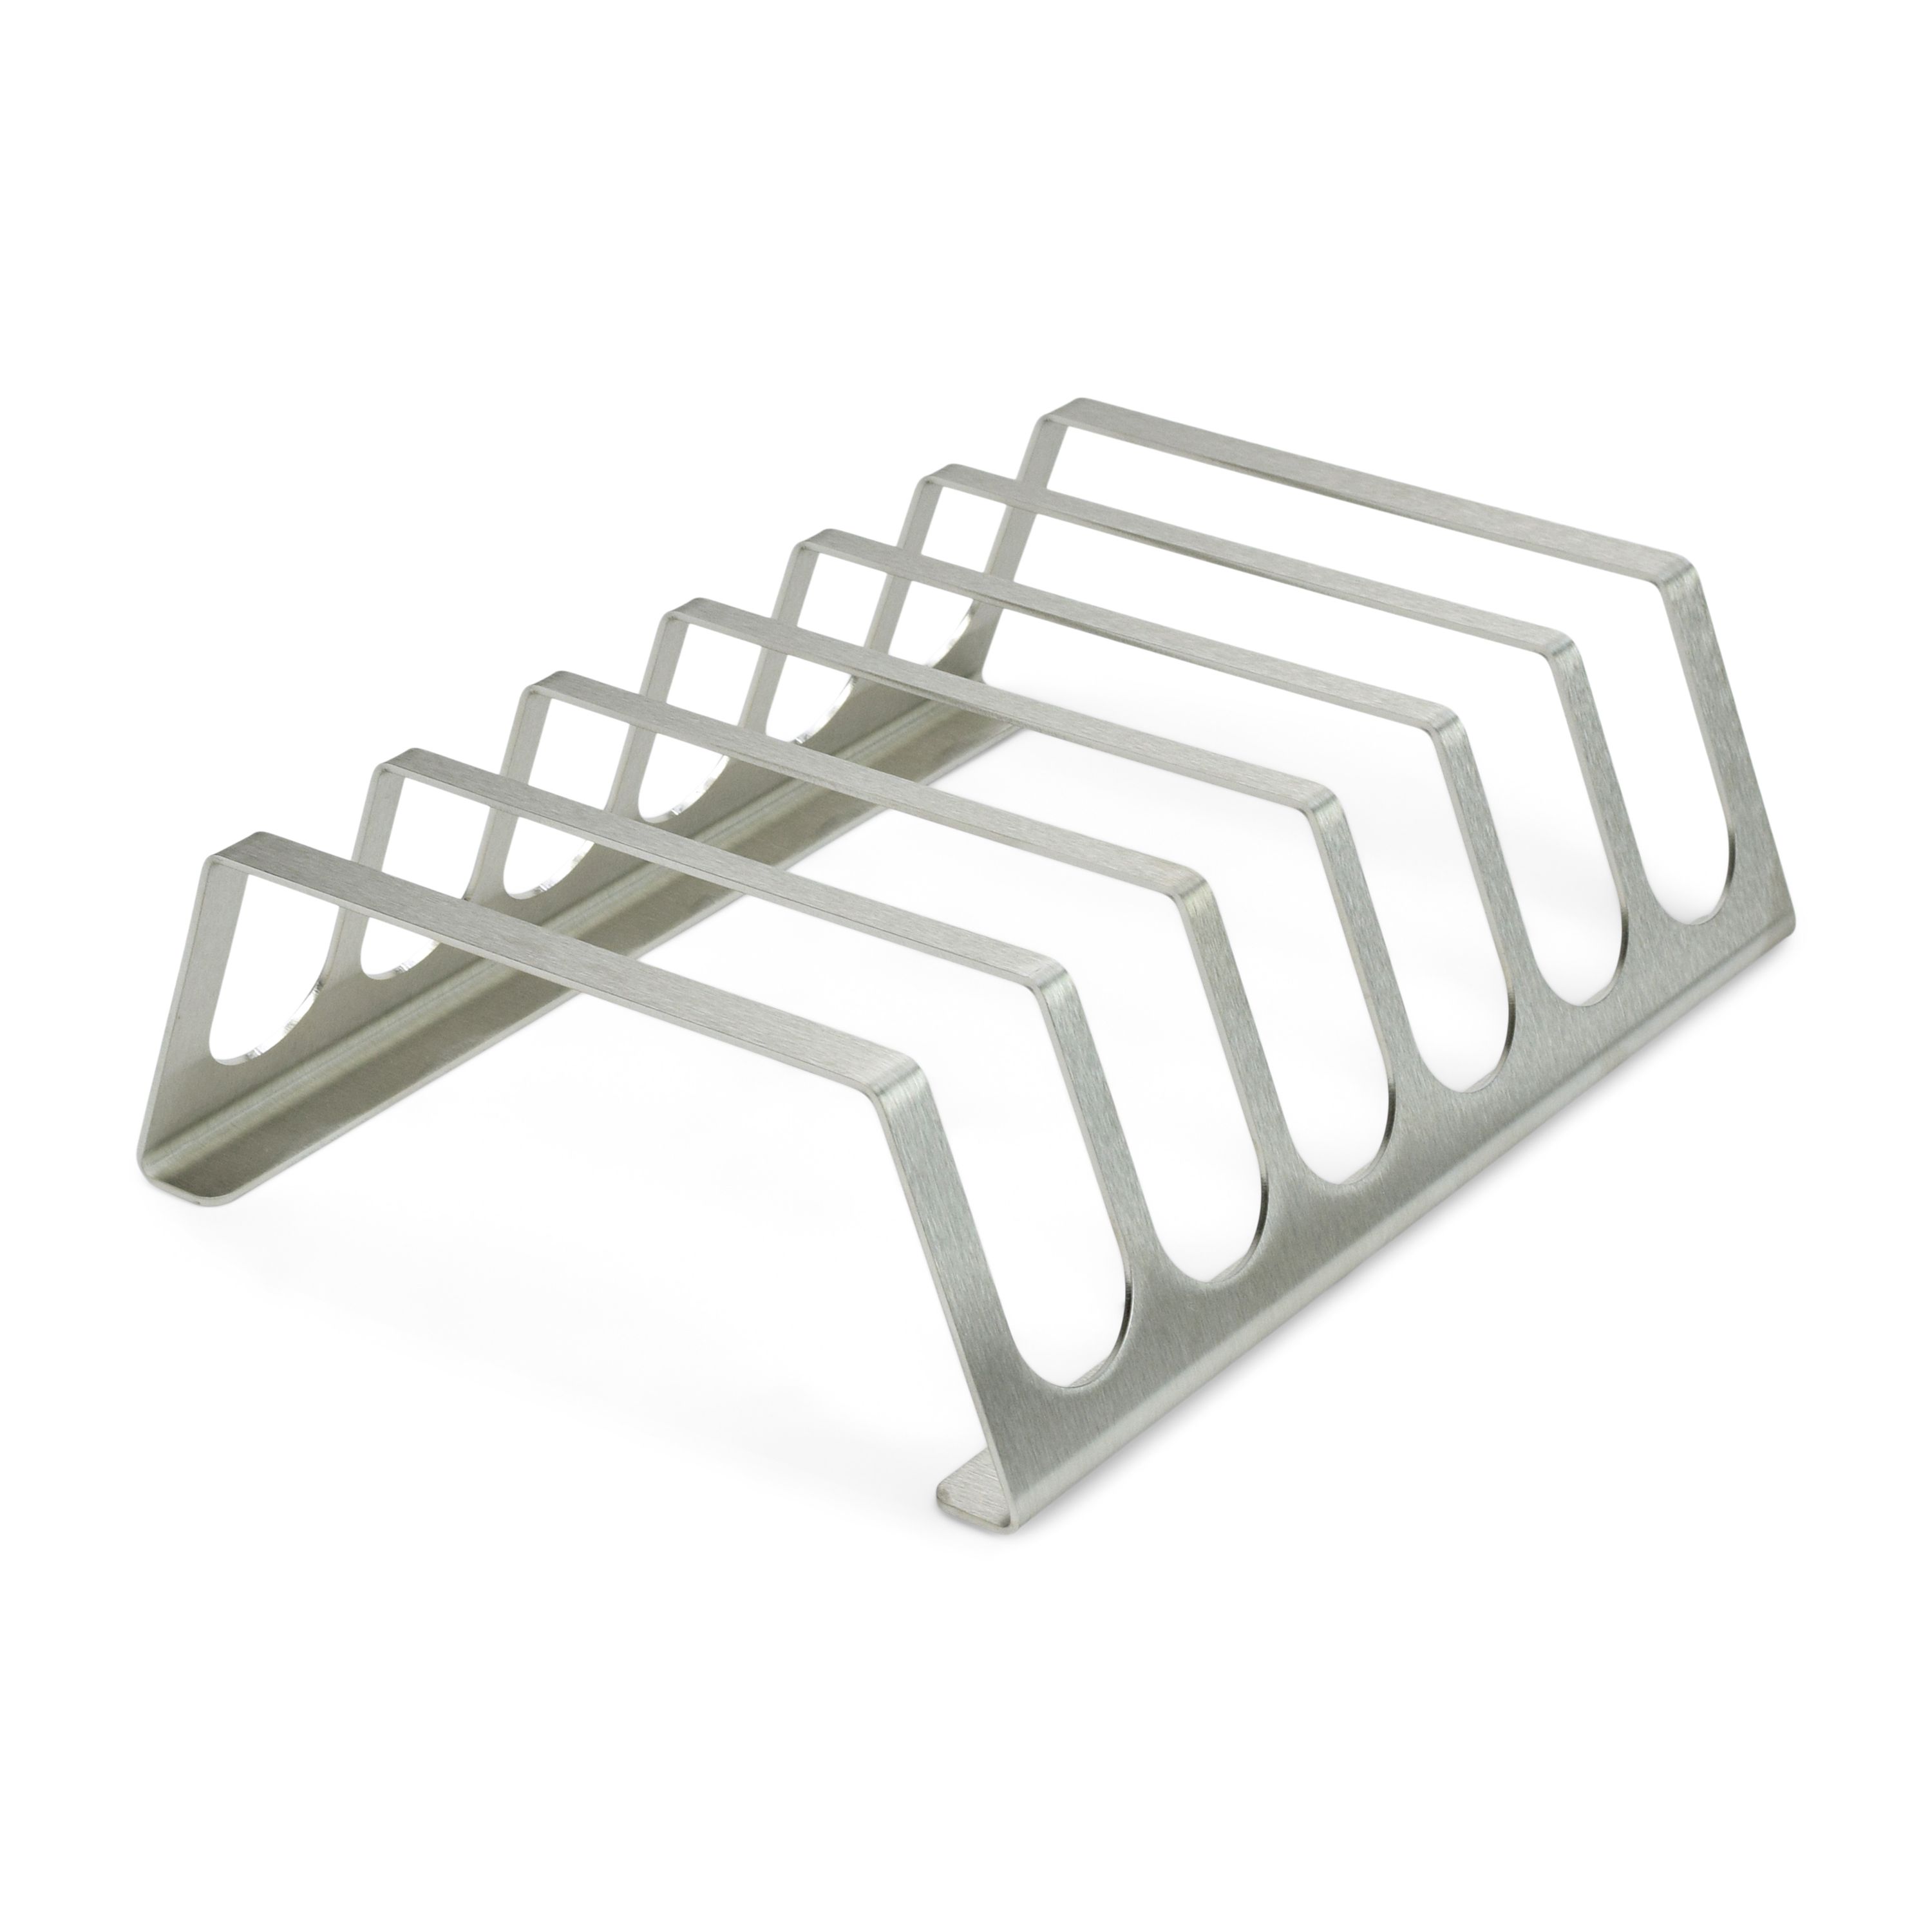 Stainless steel spare rib holder 6 ribrack for grill and oven